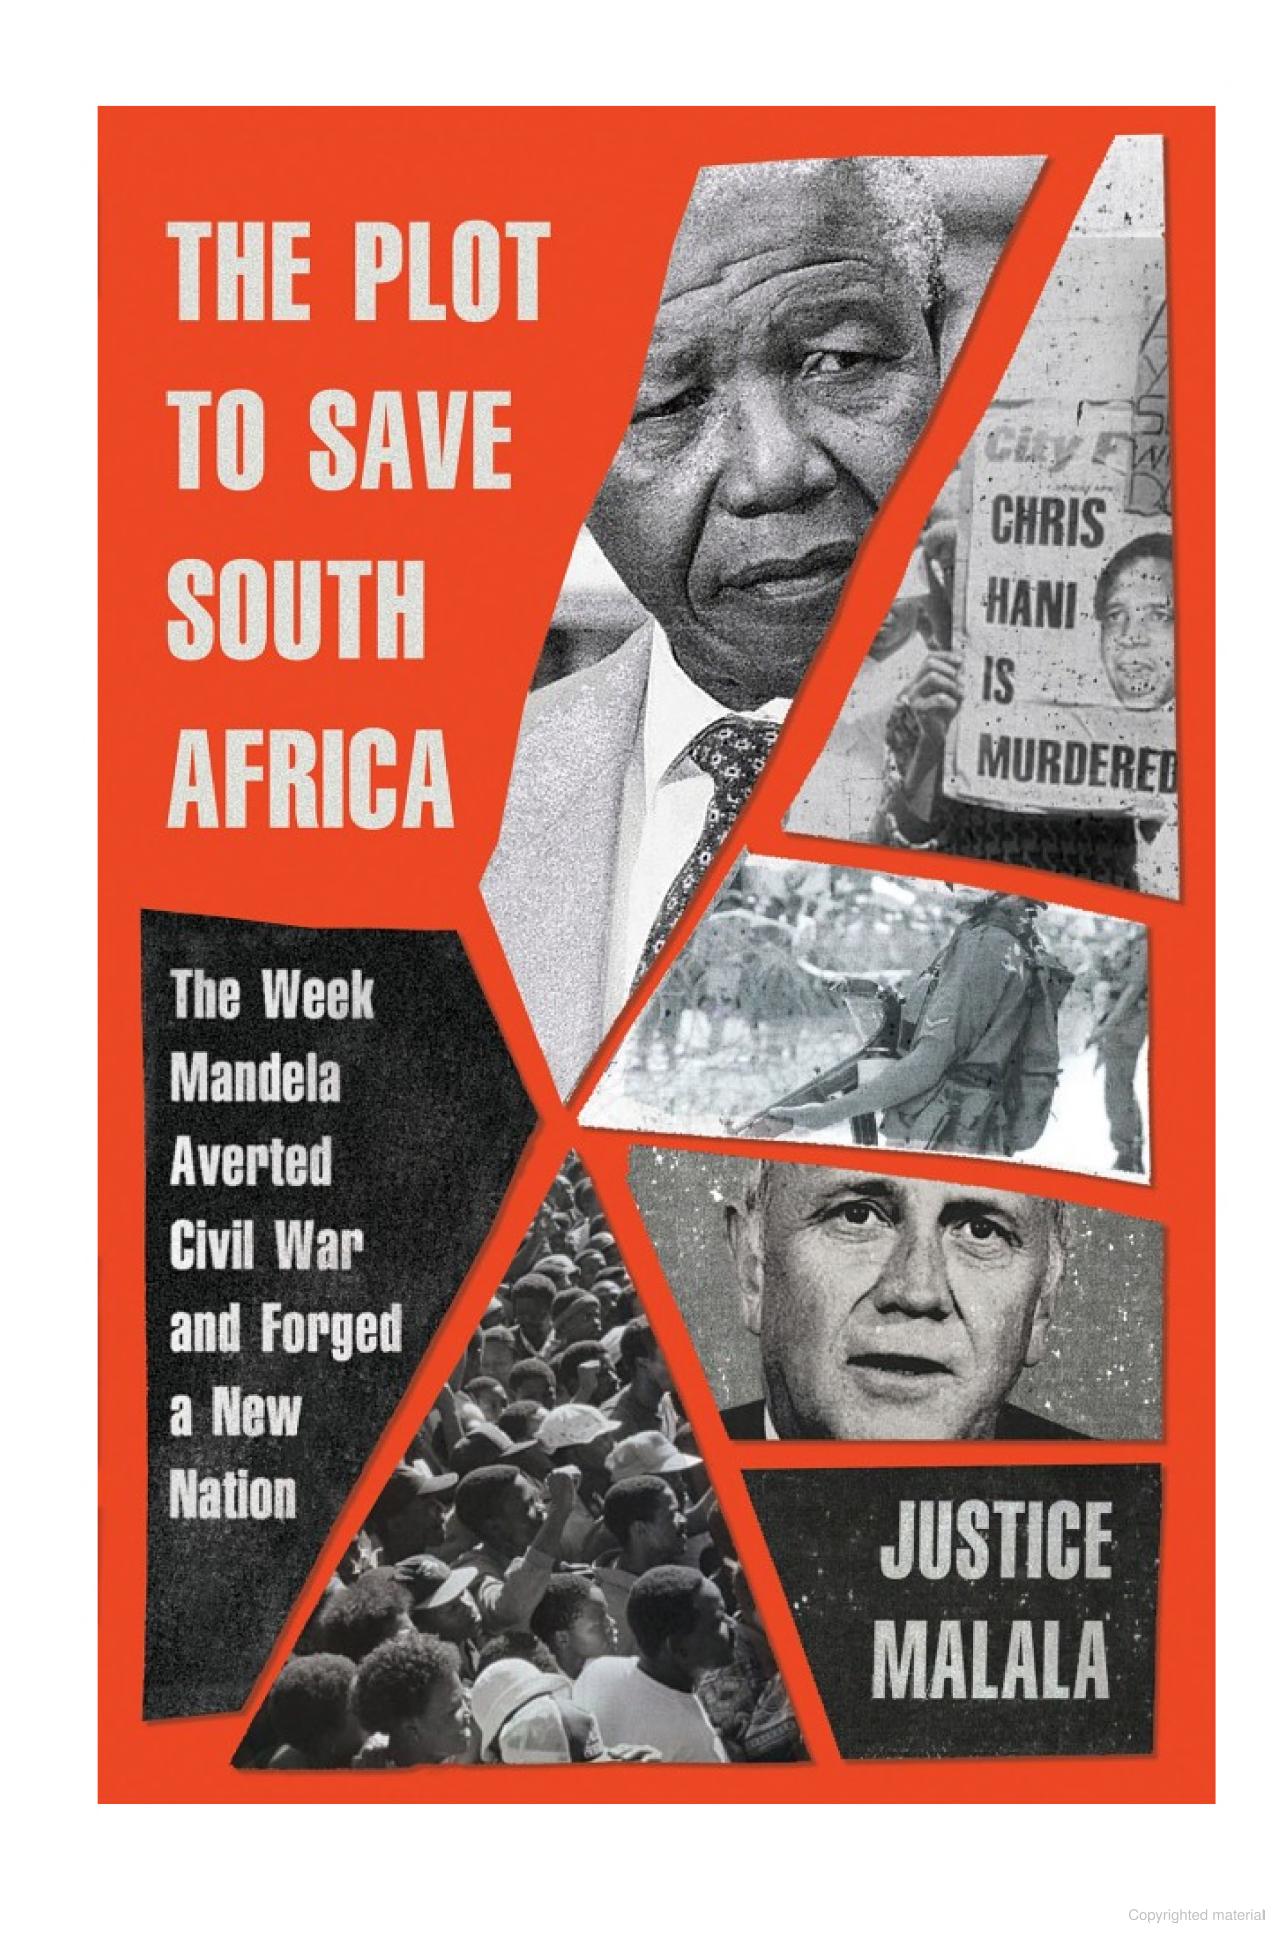 What I am Reading: The Plot to Save South Africa by Justice Malala